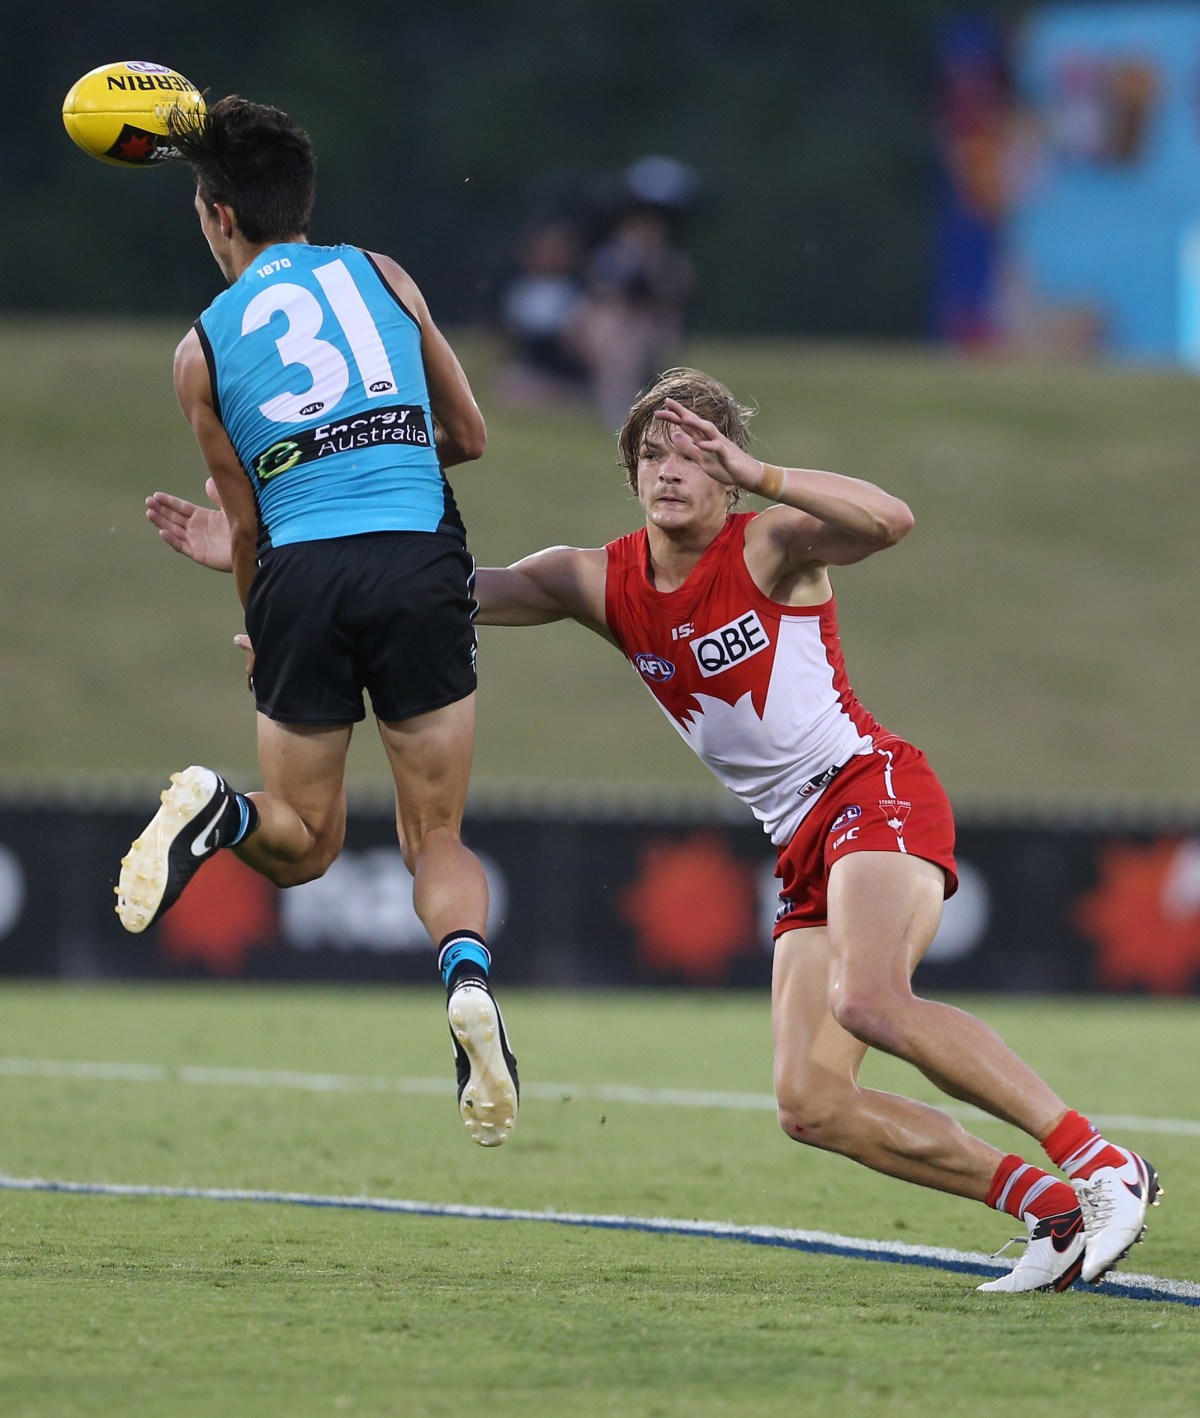 Aidyn Johnson of the Power takes a mark beating Brandon Jack of the Swans during the AFL NAB Challenge fixture between the Sydney Swans and Port Adelaide Power at Blacktown International Sports Park in Sydney, Saturday, Feb. 20, 2016. (AAP Image/Craig Golding) NO ARCHIVING, EDITORIAL USE ONLY